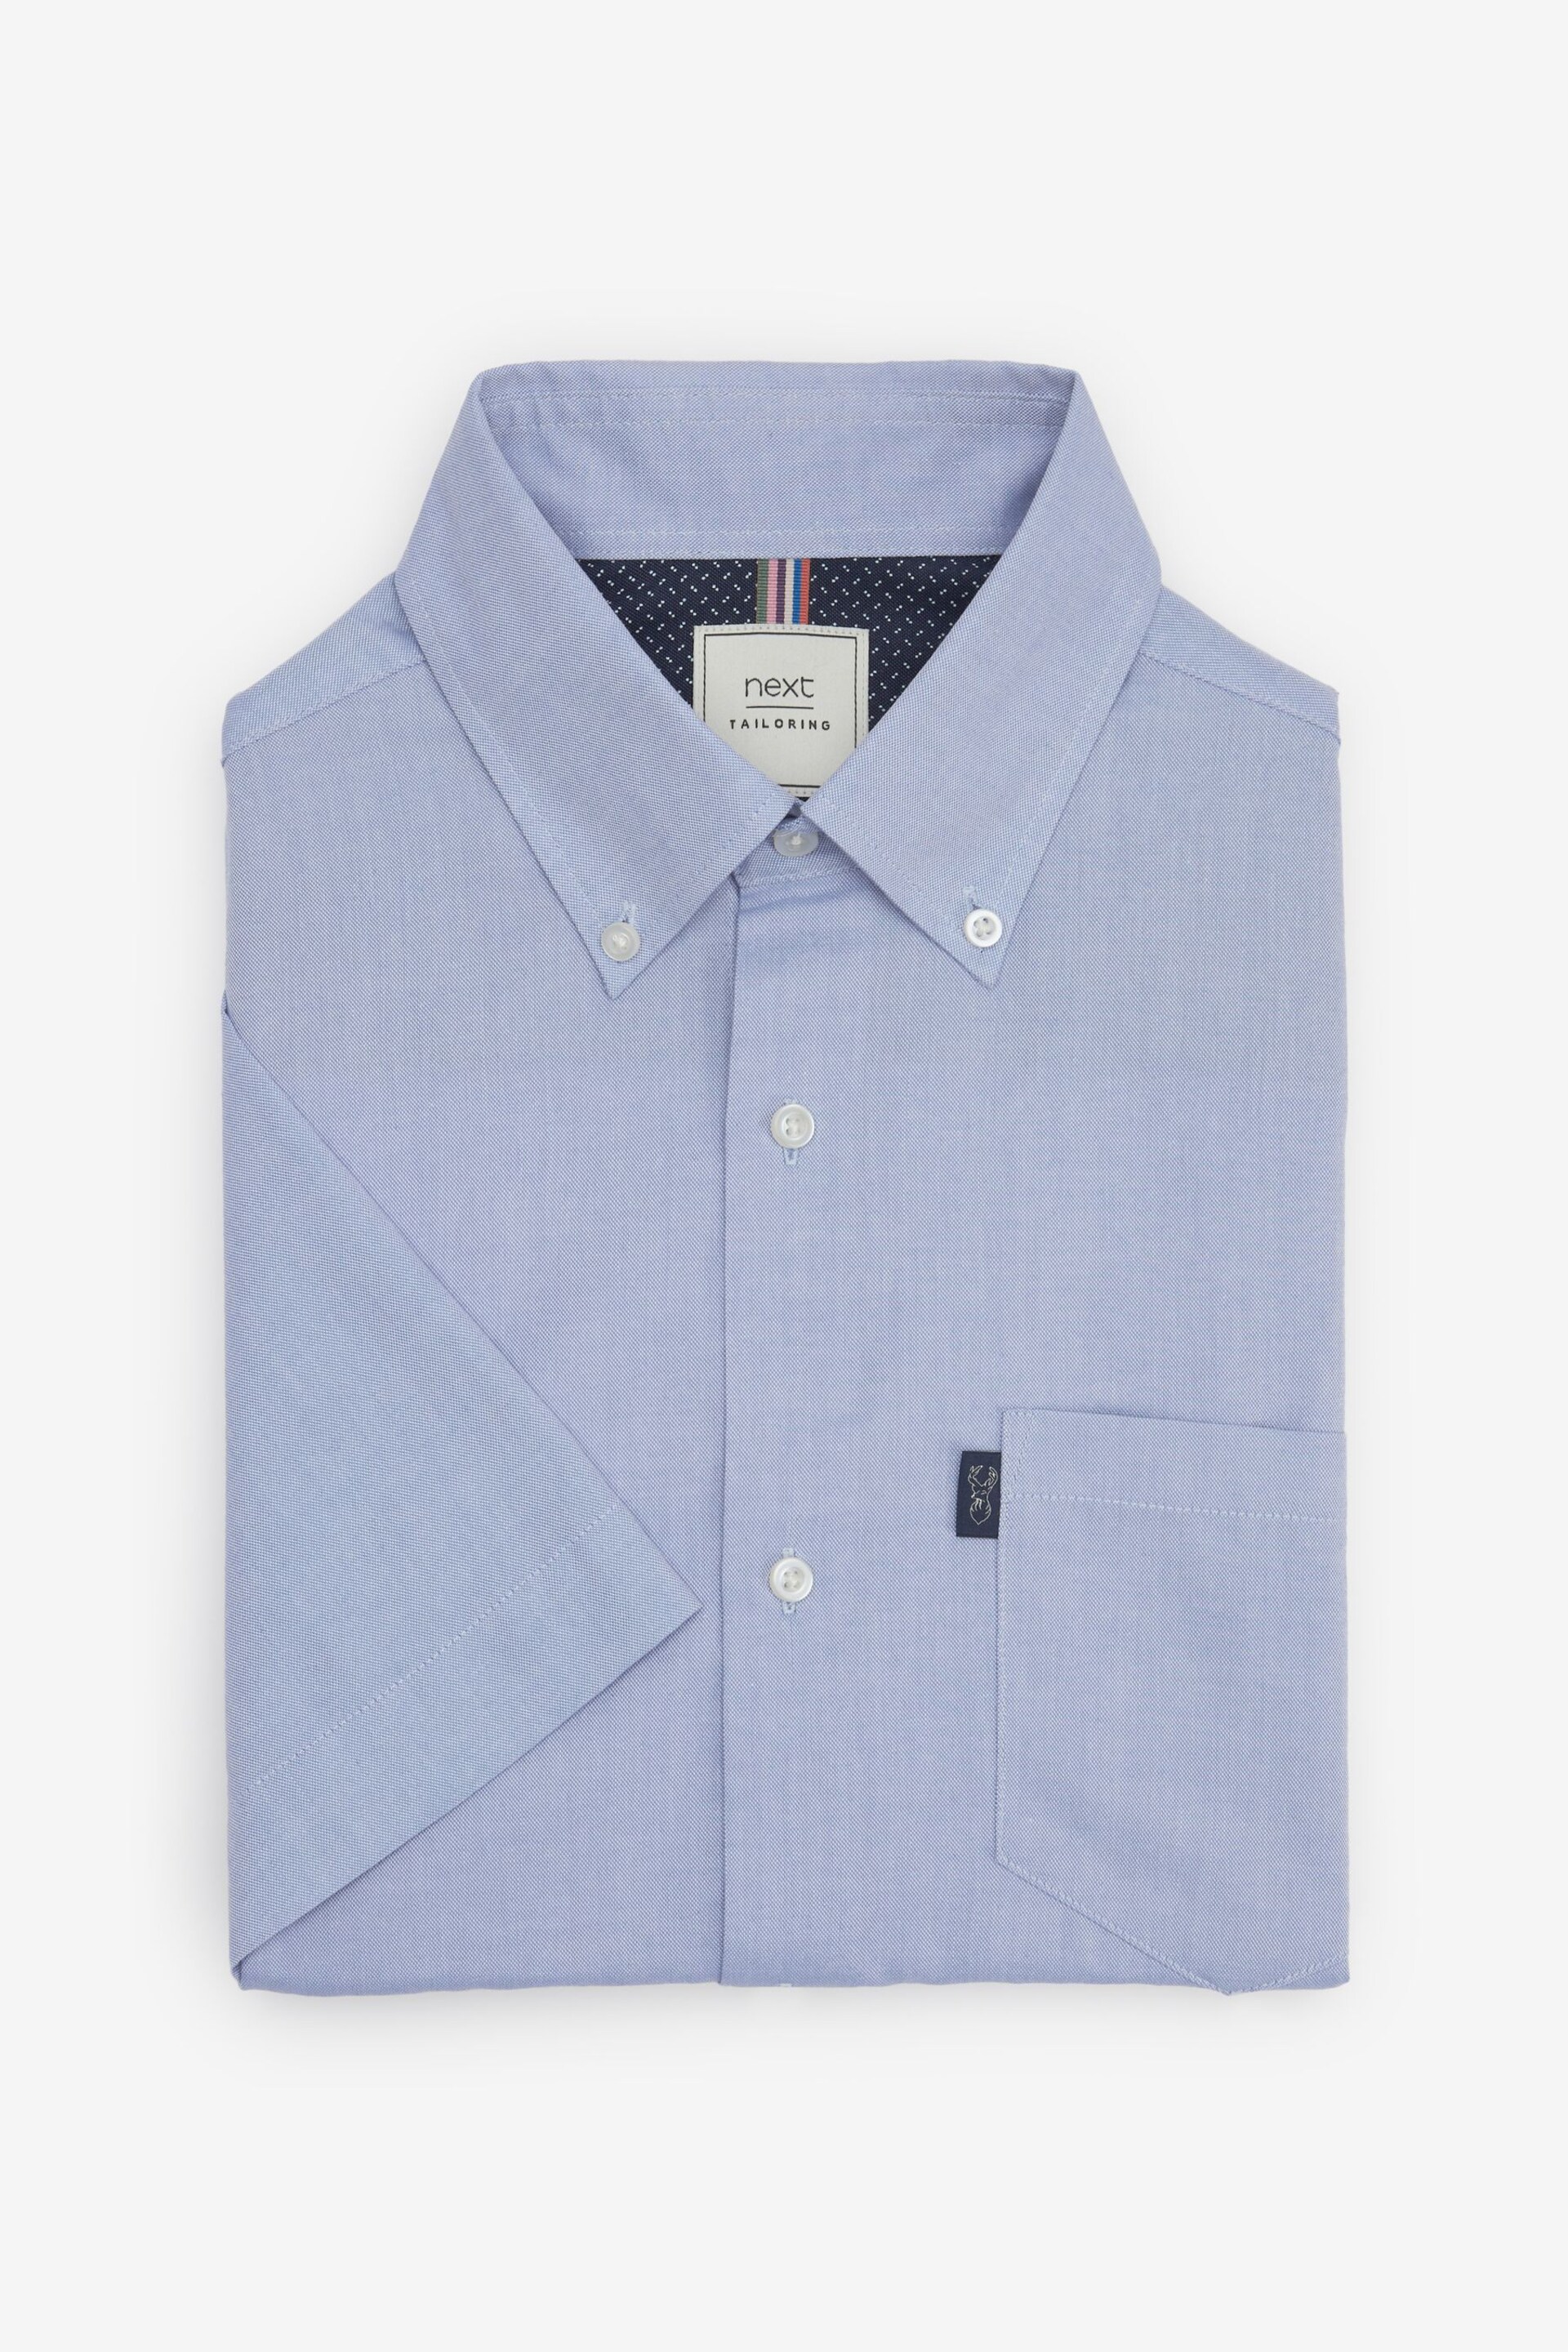 Pale Blue Slim Fit Easy Iron Button Down Oxford Shirt - Image 4 of 6